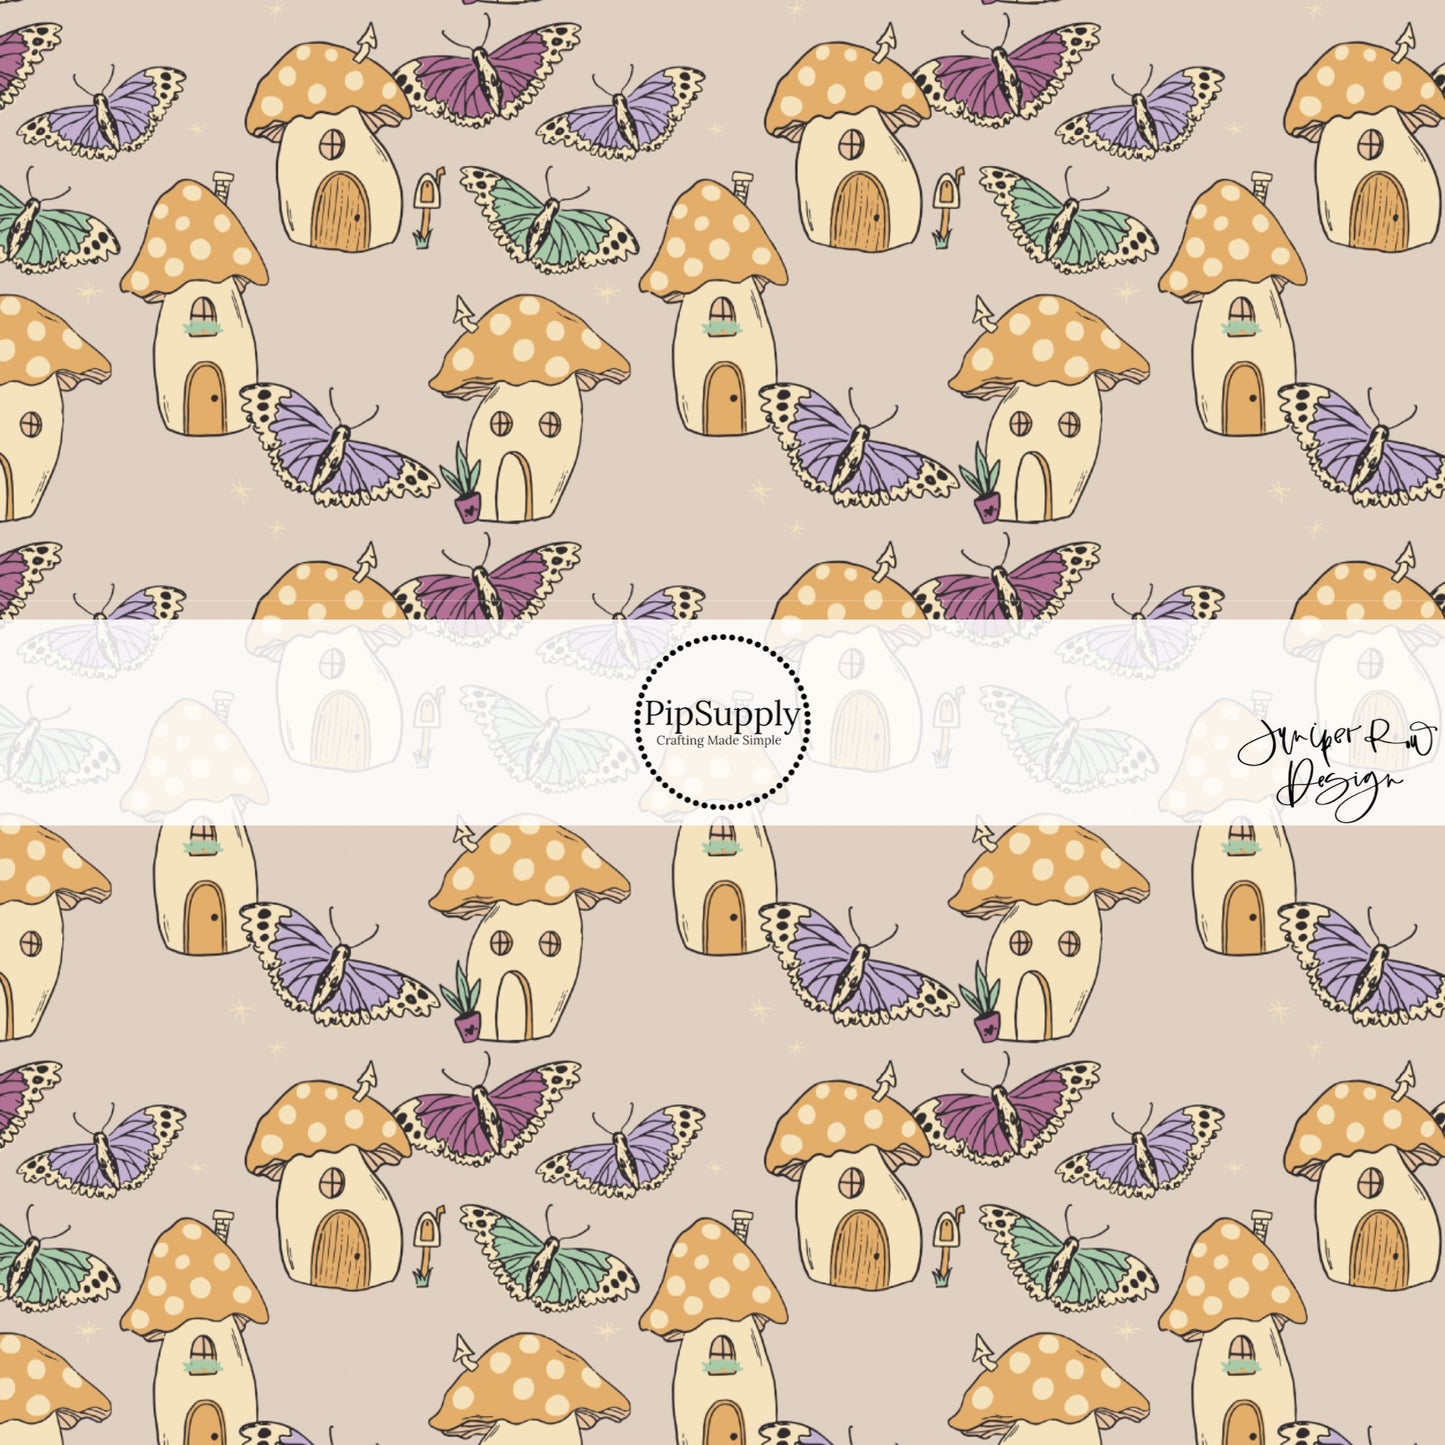 These enchanted themed light cream fabric by the yard features mushroom homes and butterflies in lavender, mint, orange, pink, and cream. This fun summer themed fabric can be used for all your sewing and crafting needs! 